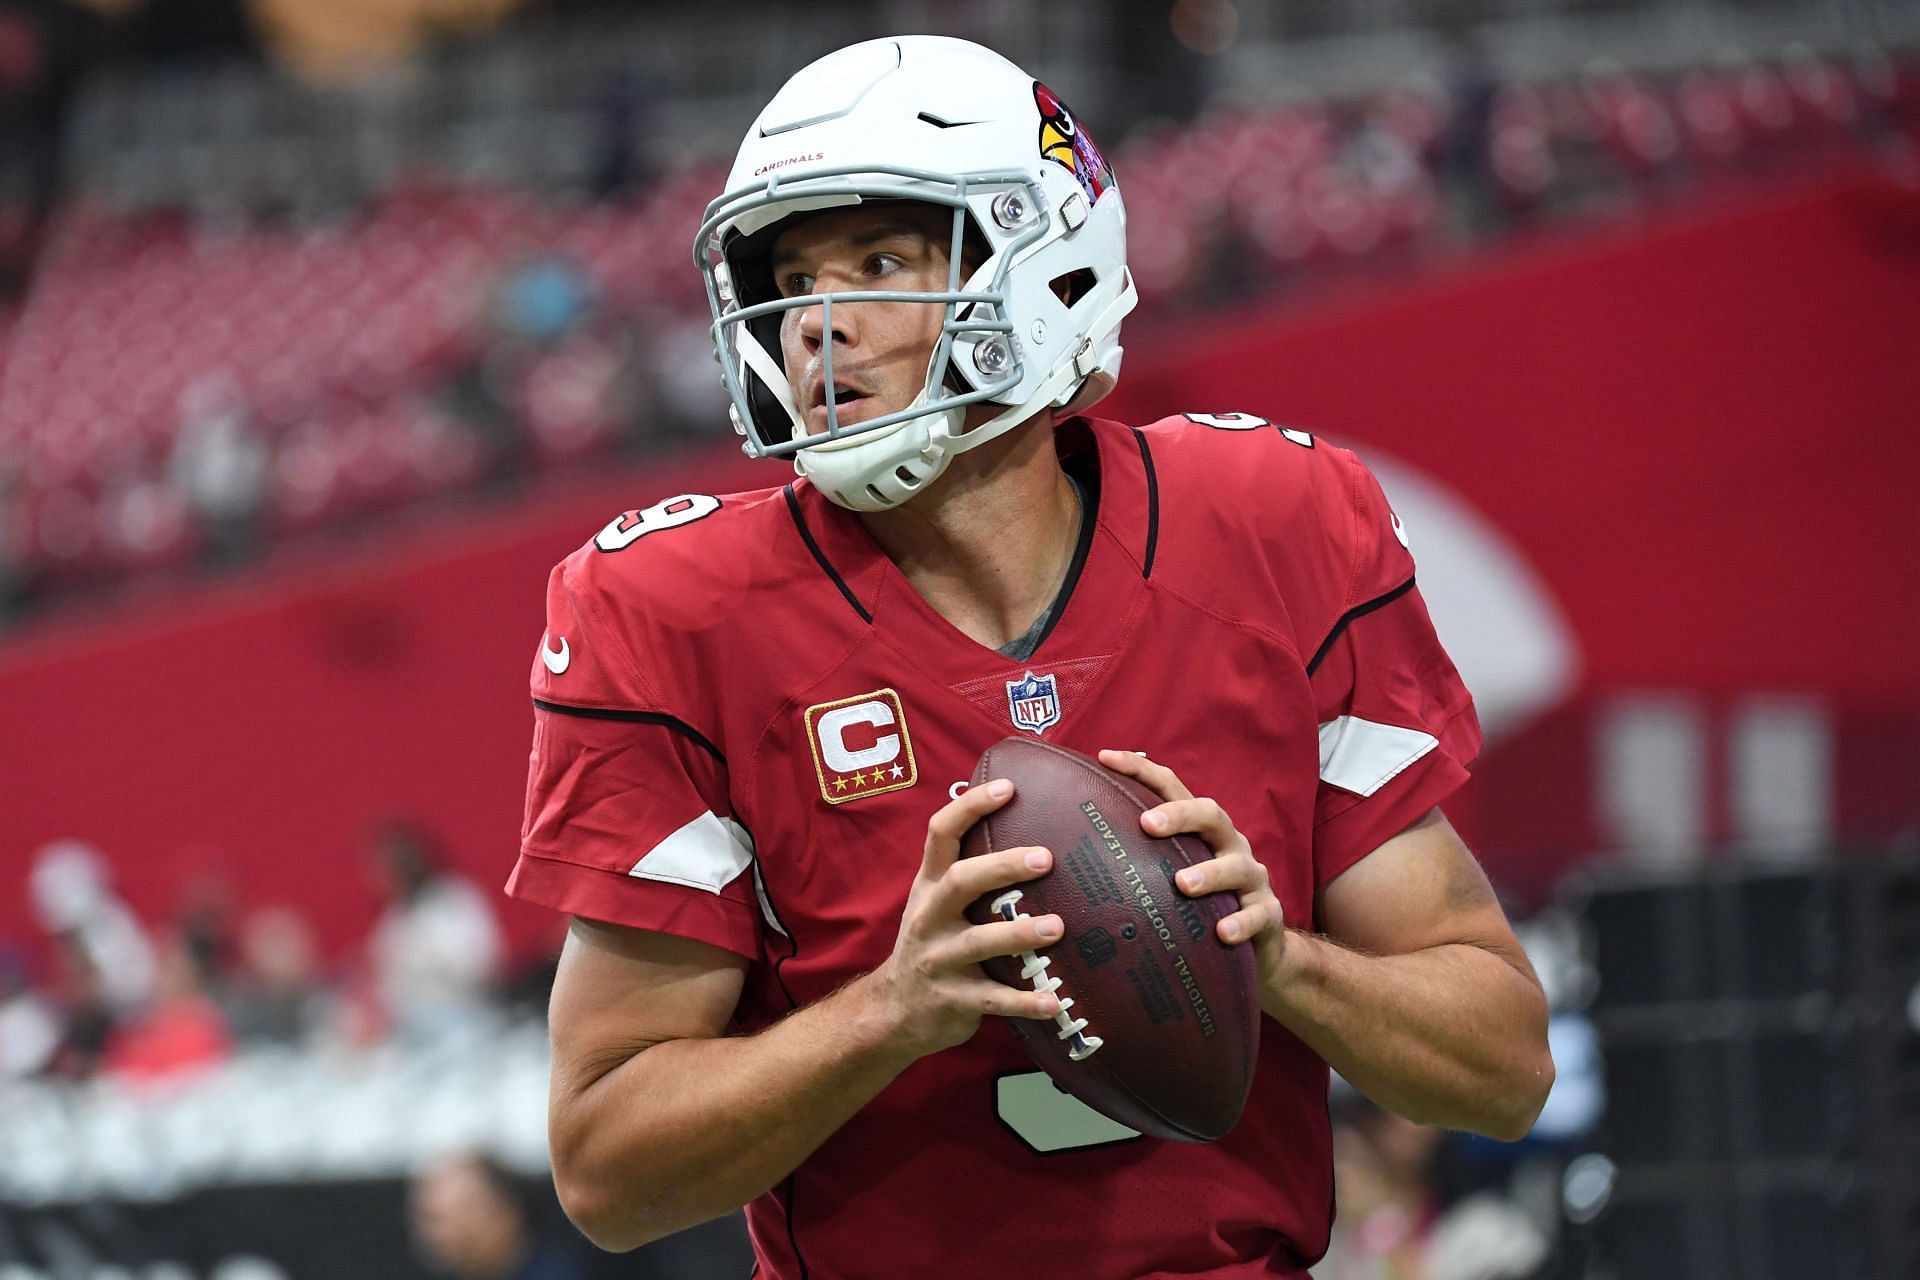 Sam Bradford is one of those No. 1 picks in NFL who was shown the door by his team